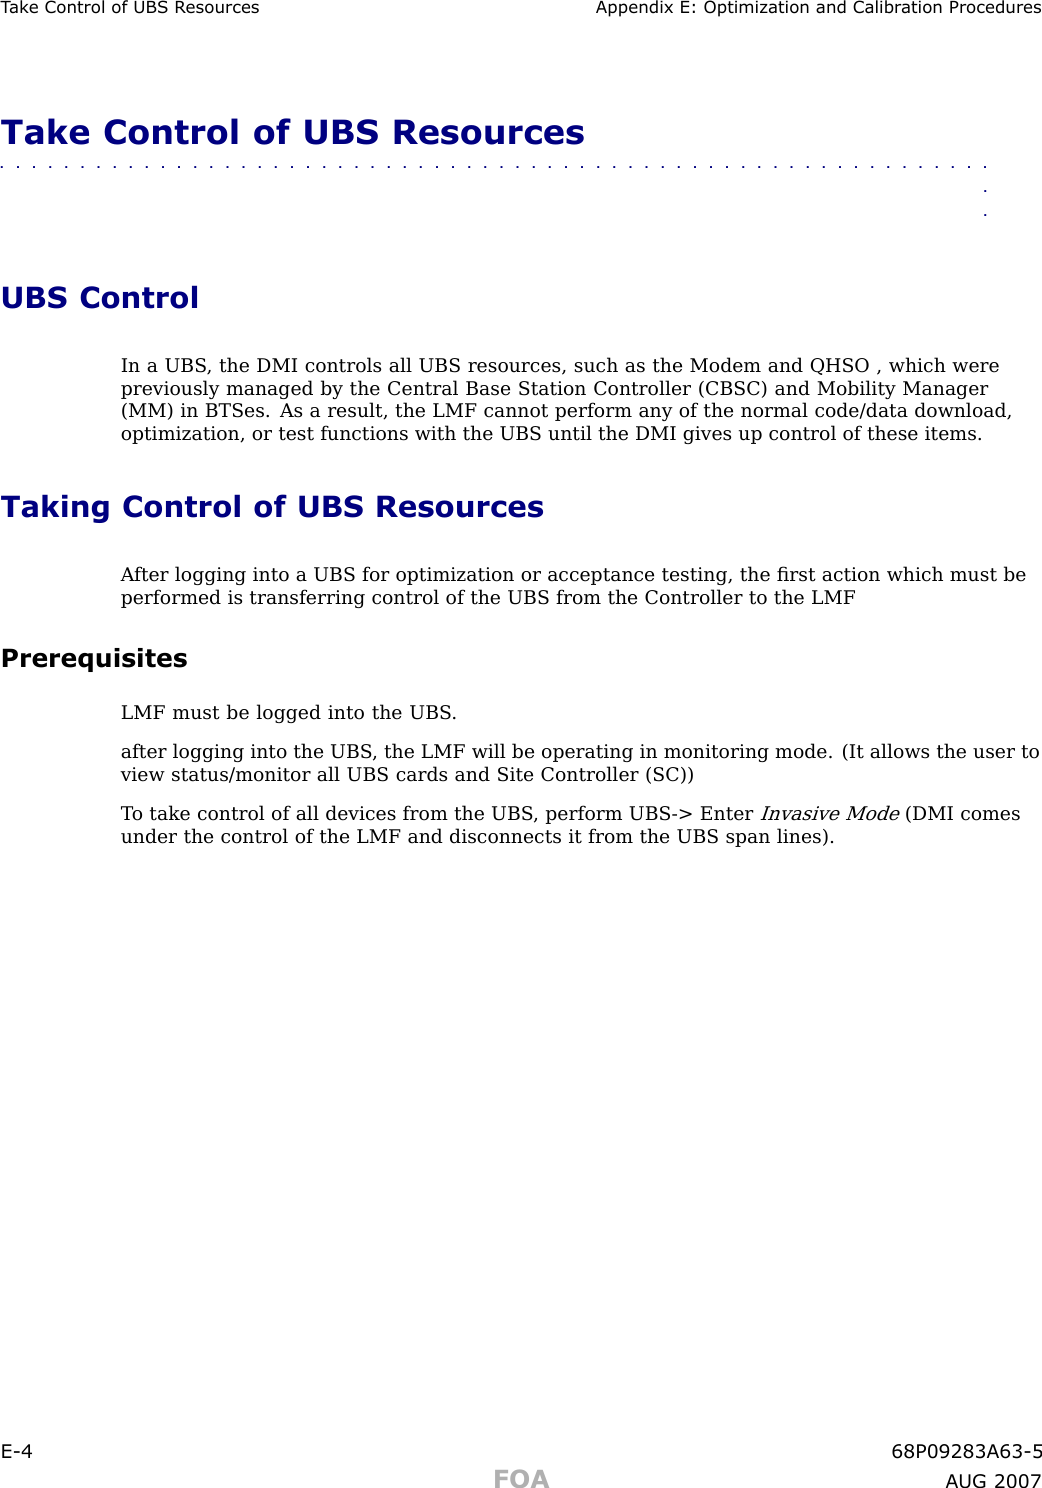 T ak e Control of UBS R esources Appendix E: Optimization and Calibr ation ProceduresTake Control of UBS Resources■■■■■■■■■■■■■■■■■■■■■■■■■■■■■■■■■■■■■■■■■■■■■■■■■■■■■■■■■■■■■■■■UBS ControlIn a UBS , the DMI controls all UBS resources, such as the Modem and QHSO , which werepreviously managed by the Central Base Station Controller (CBSC) and Mobility Manager(MM) in BTSes. As a result, the LMF cannot perform any of the normal code/data download,optimization, or test functions with the UBS until the DMI gives up control of these items.Taking Control of UBS ResourcesA fter logging into a UBS for optimization or acceptance testing, the ﬁrst action which must beperformed is transferring control of the UBS from the Controller to the LMFPrerequisitesLMF must be logged into the UBS .after logging into the UBS , the LMF will be operating in monitoring mode. (It allows the user toview status/monitor all UBS cards and Site Controller (SC))T o take control of all devices from the UBS , perform UBS -&gt; EnterInvasive Mode(DMI comesunder the control of the LMF and disconnects it from the UBS span lines).E -4 68P09283A63 -5FOA A UG 2007